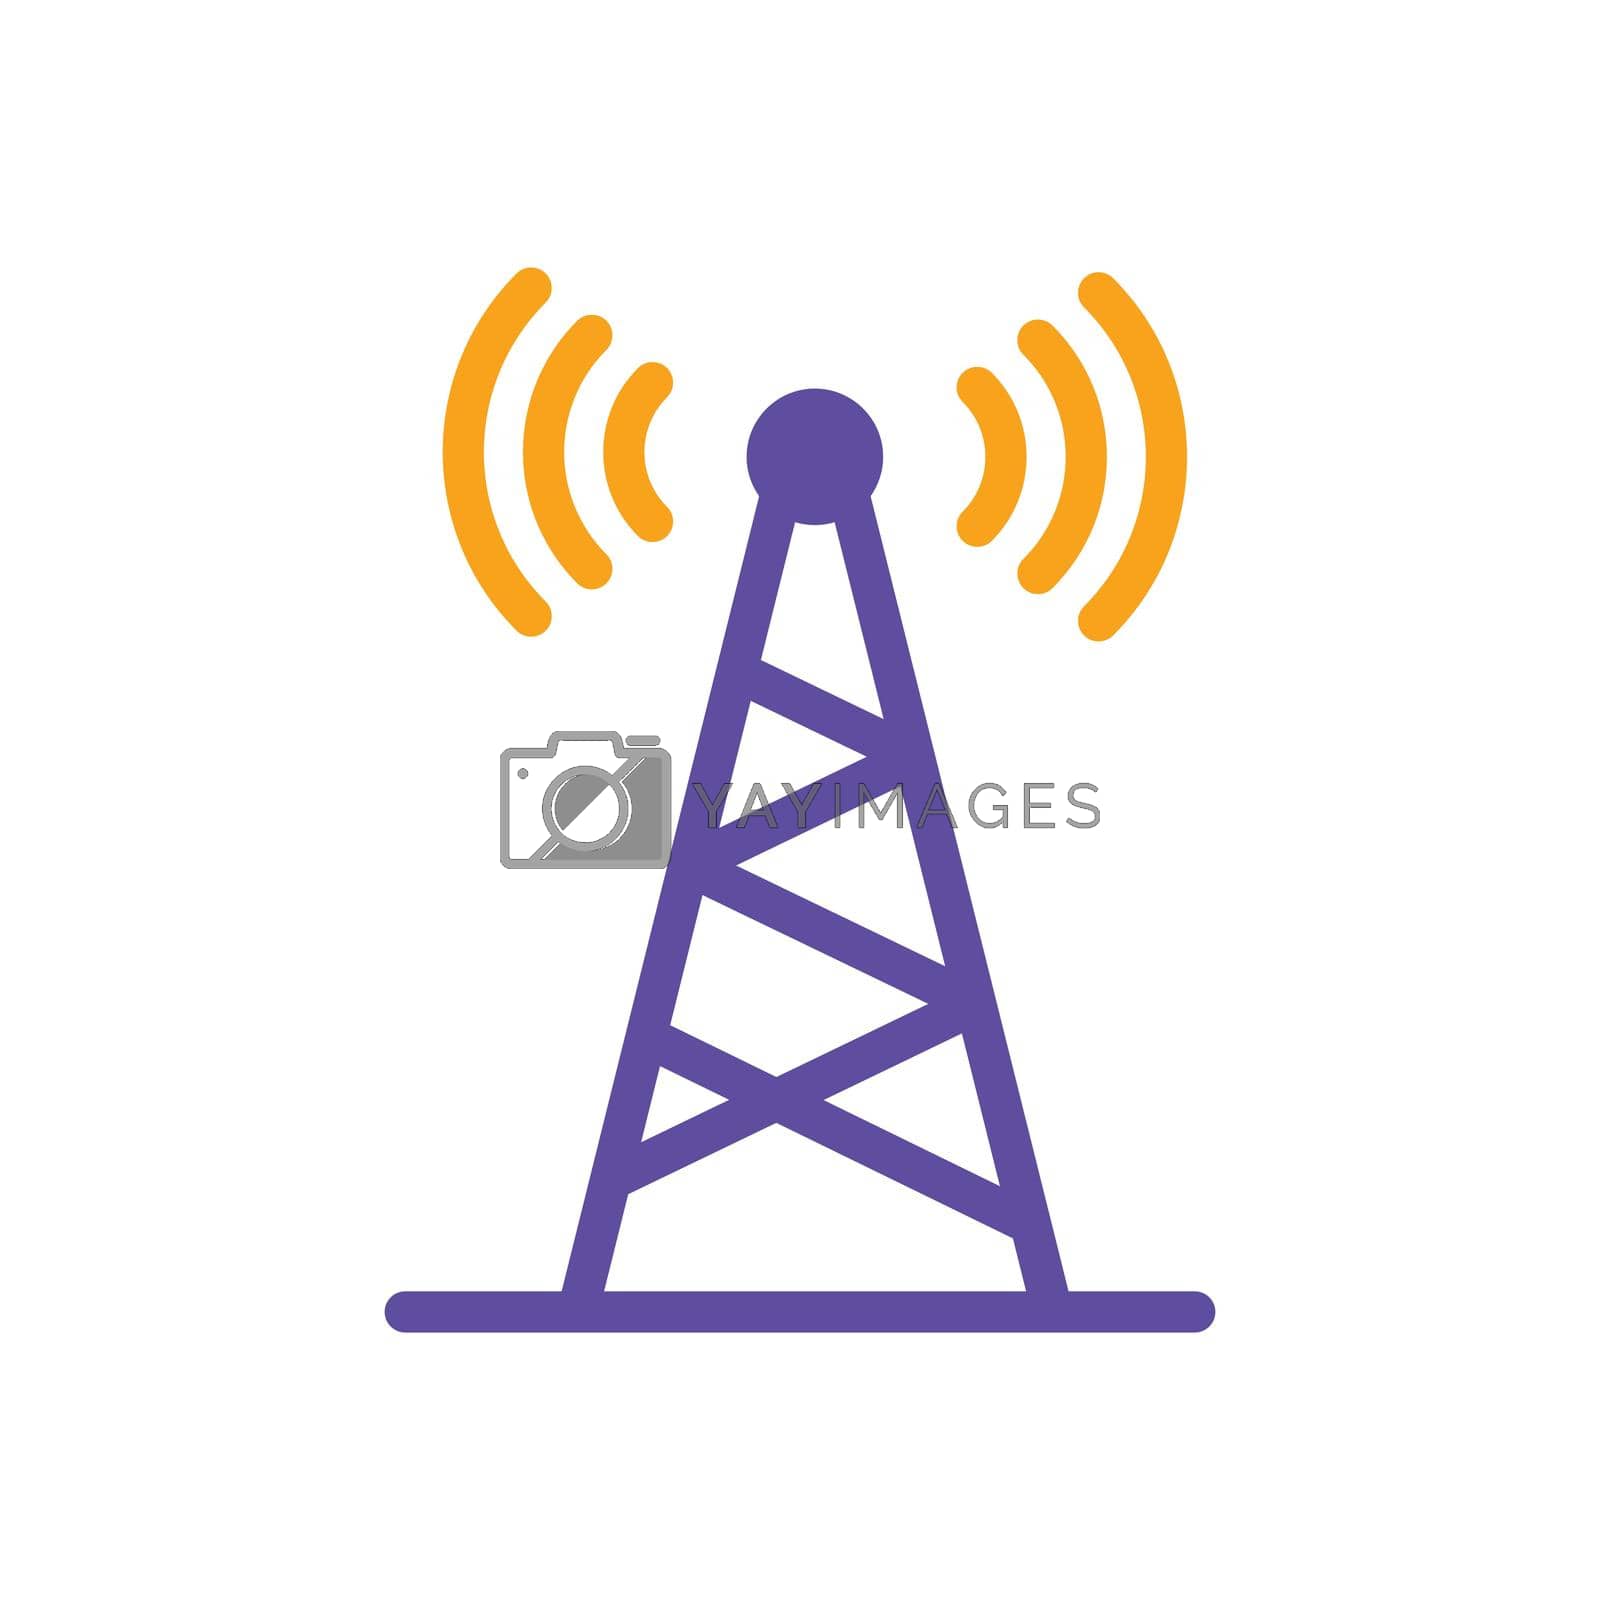 Communication antenna vector glyph icon. Navigation sign. Graph symbol for travel and tourism web site and apps design, logo, app, UI